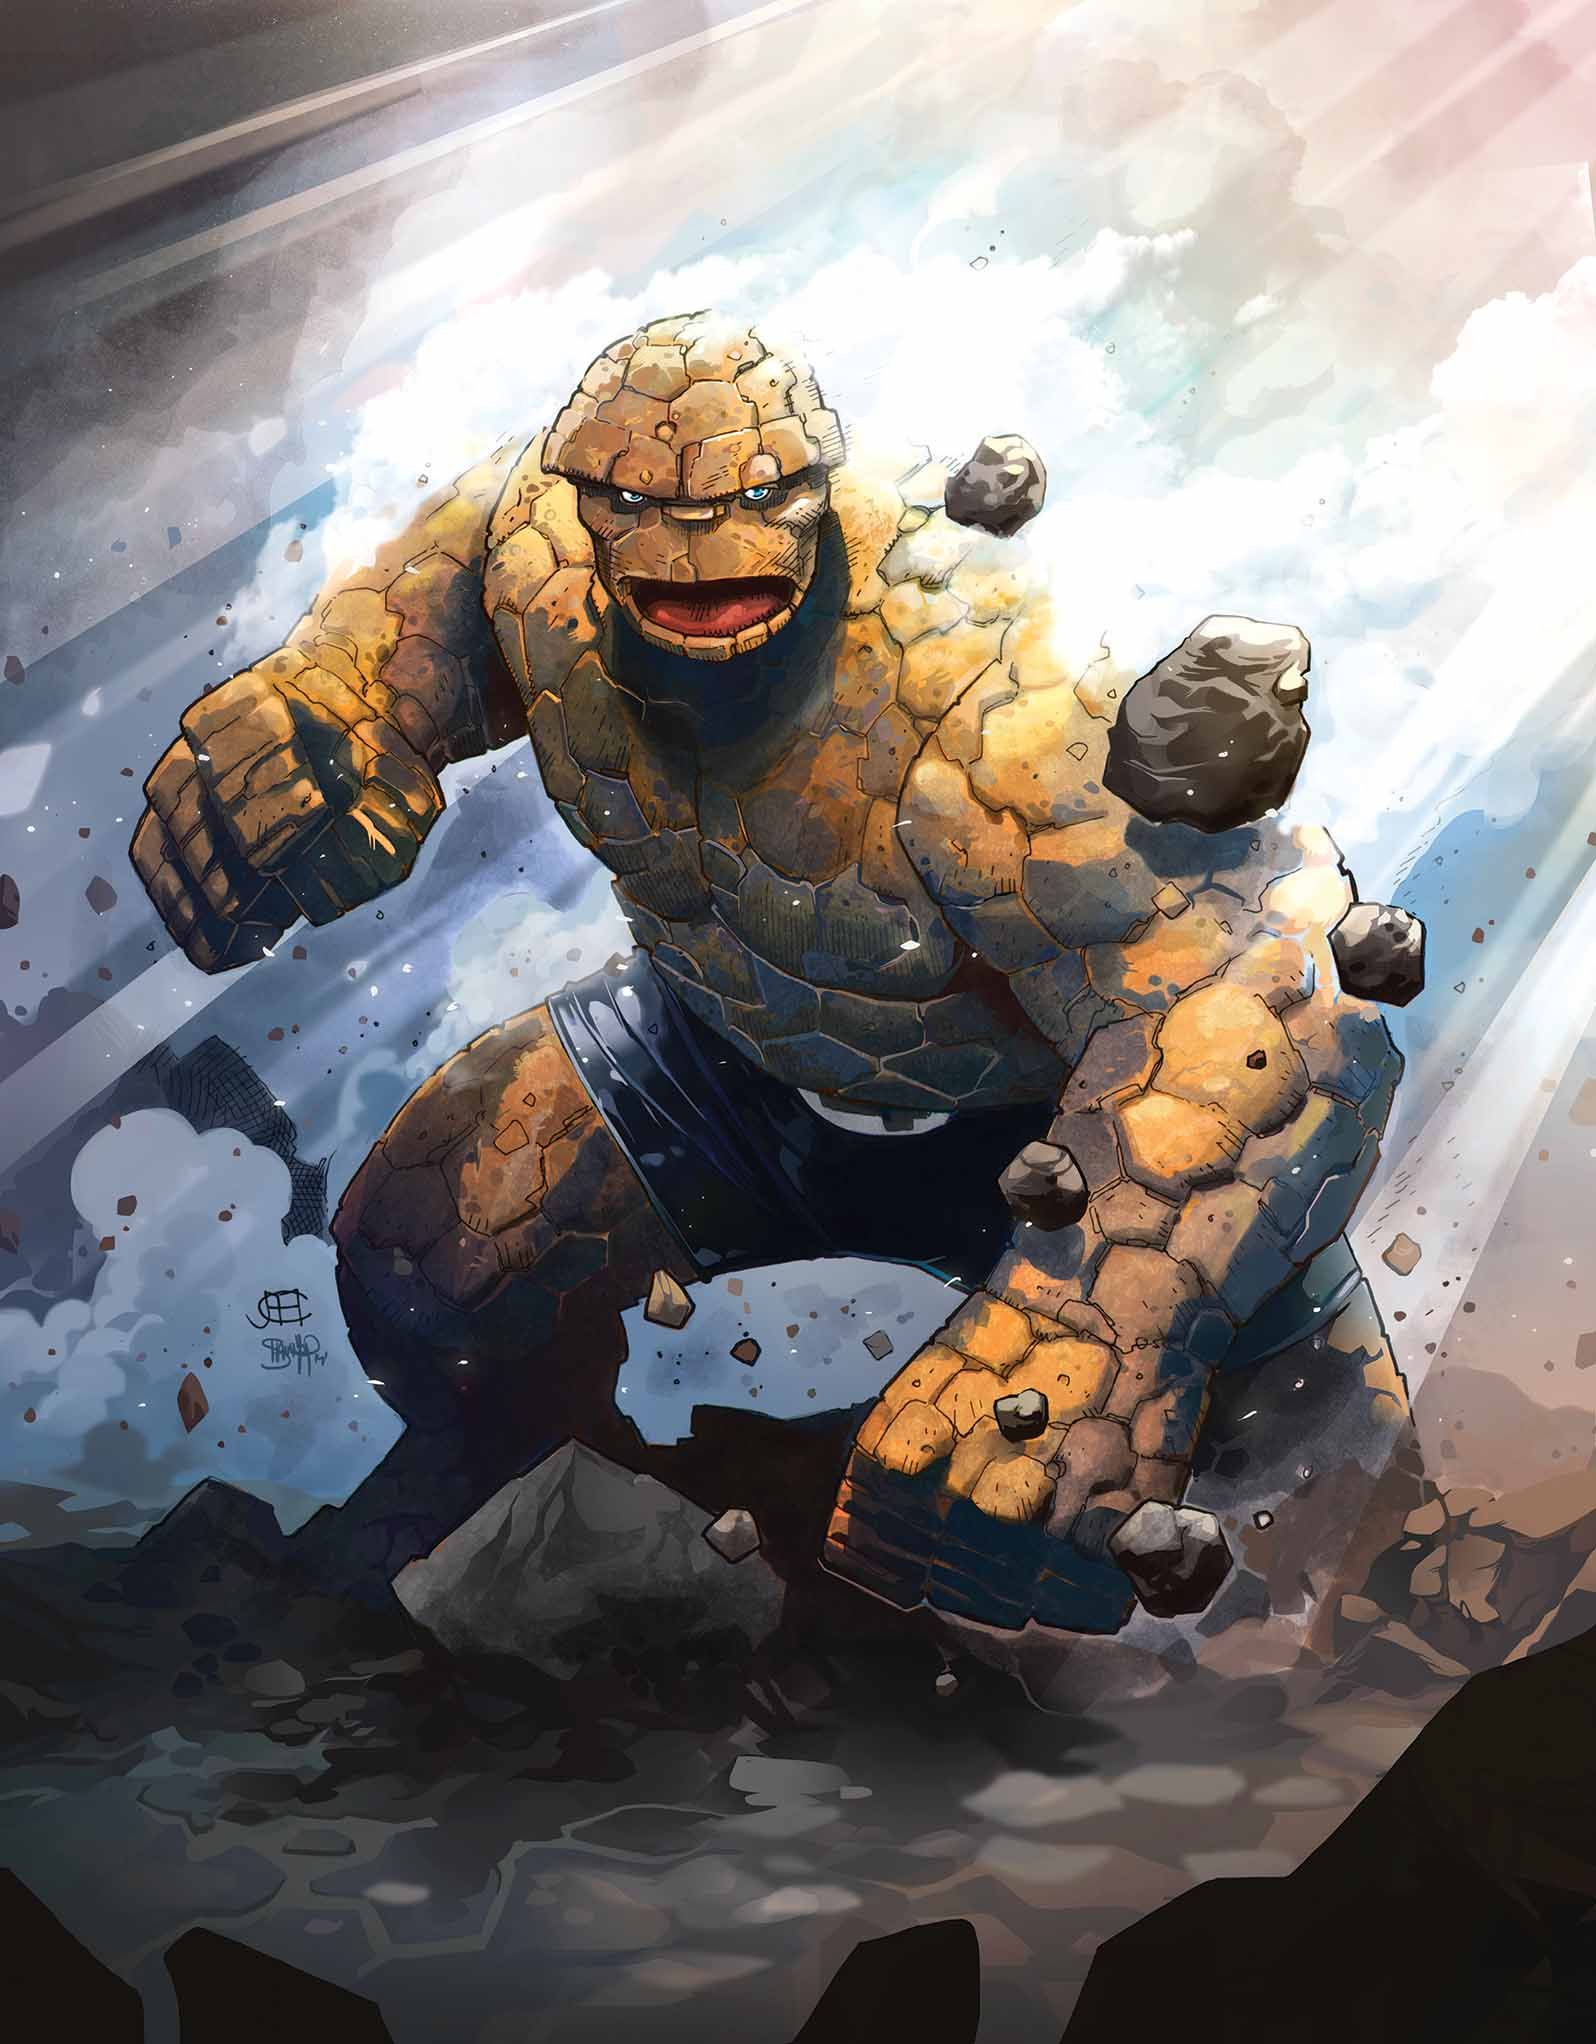 The Thing as drawn by Cheung for a variant cover for Fantastic Four #642